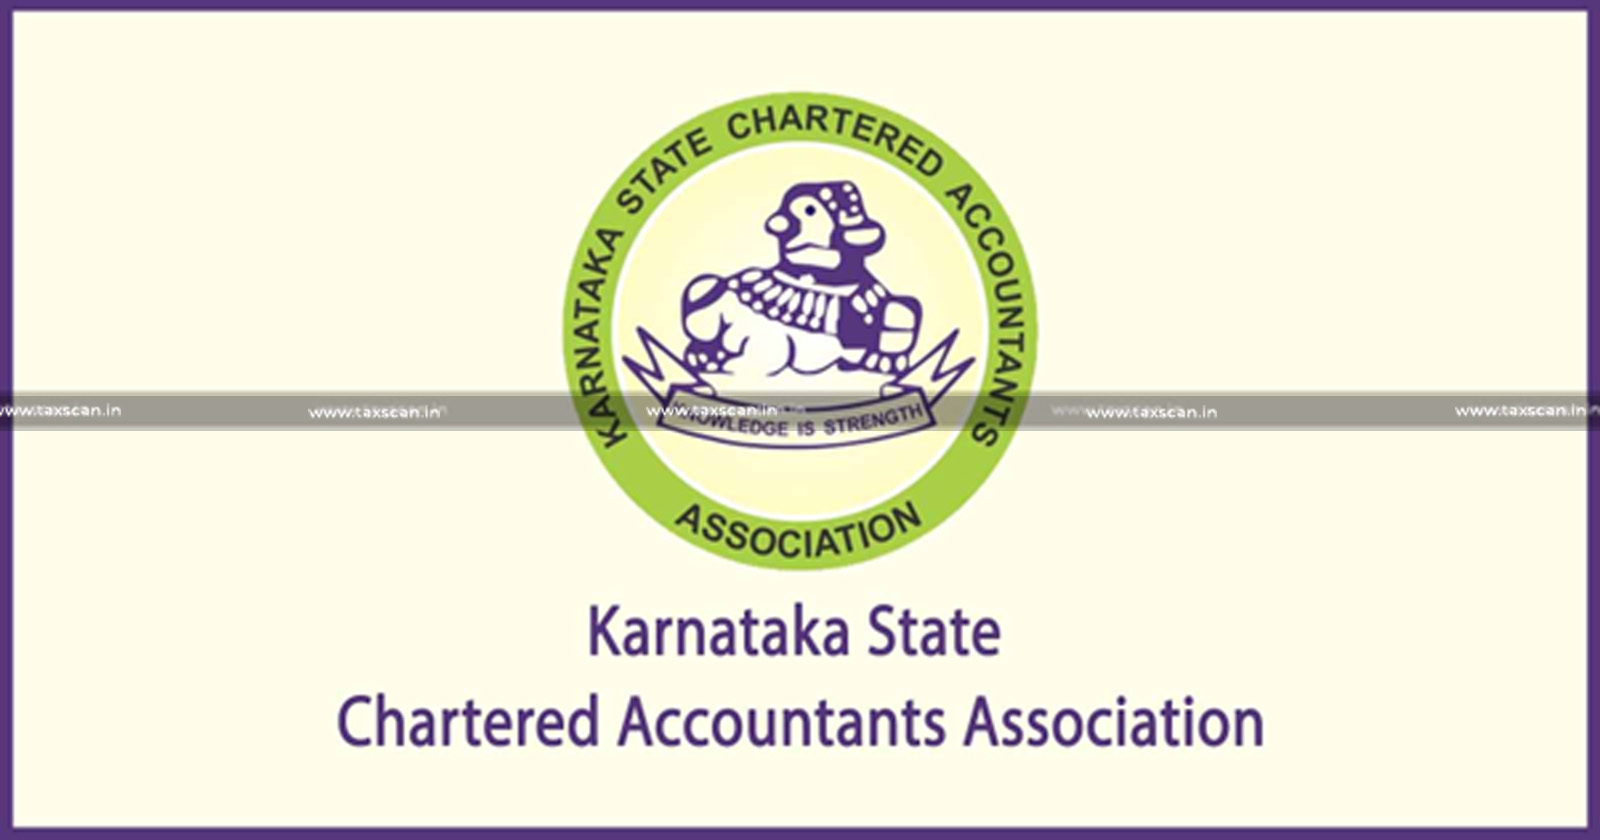 Karnataka State Chartered Accountants Association - Clarification from Finance Ministry - admission of Indian Trusts - Partners in LLPs - Finance Ministry - LLPs -Indian Trusts - taxscan